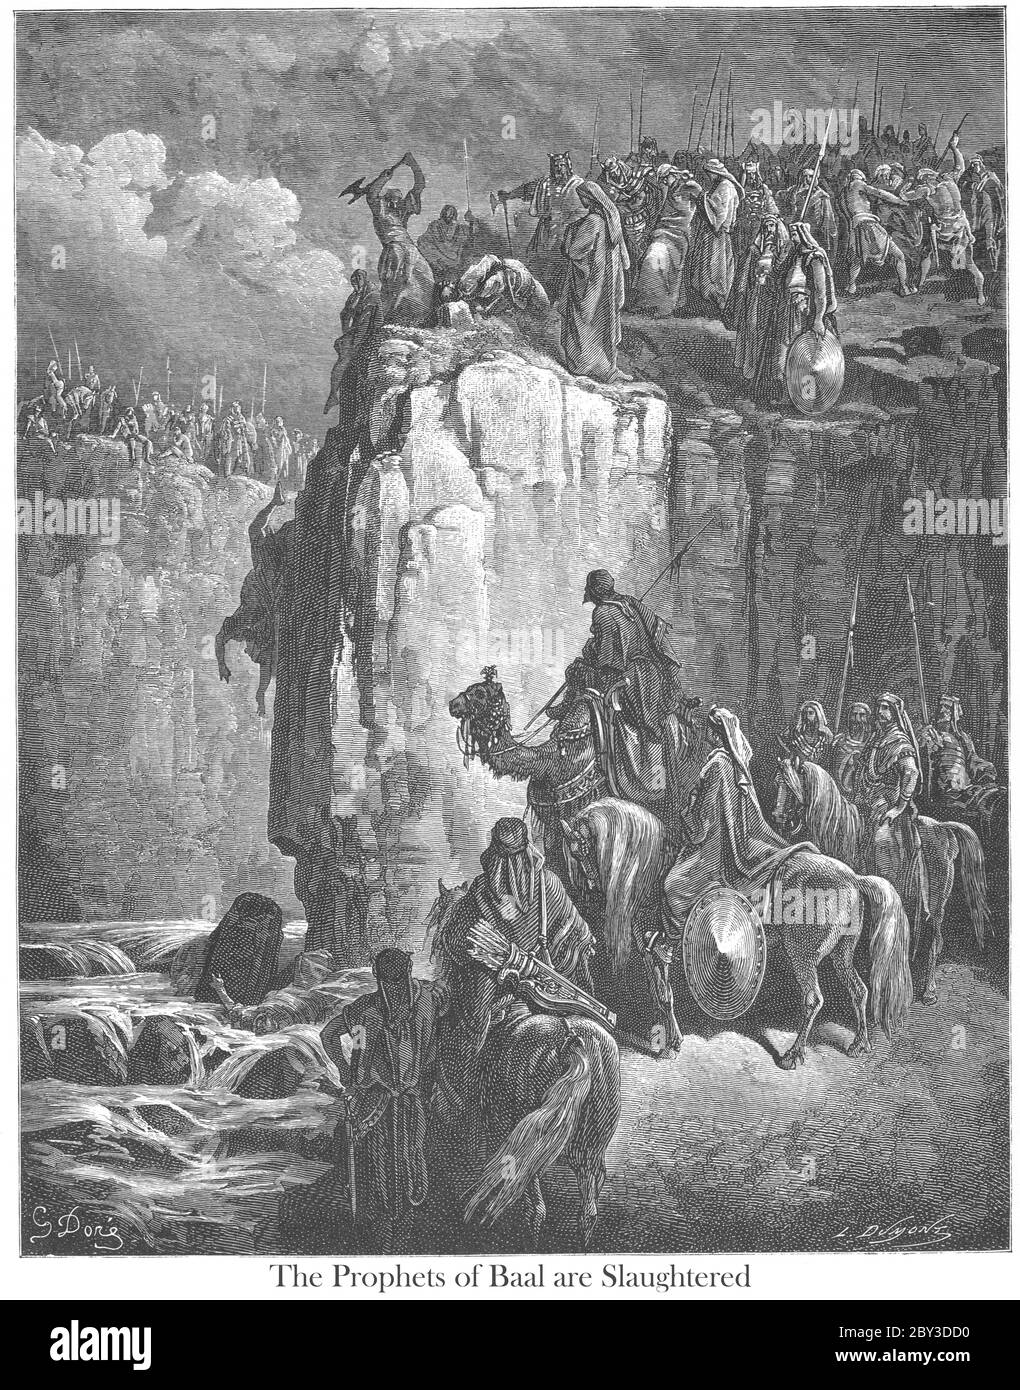 Slaughter of the Prophets of Baal [at The Kishon River] 1 Kings 18:38-40 From the book 'Bible Gallery' Illustrated by Gustave Dore with Memoir of Dore and Descriptive Letter-press by Talbot W. Chambers D.D. Published by Cassell & Company Limited in London and simultaneously by Mame in Tours, France in 1866 Stock Photo